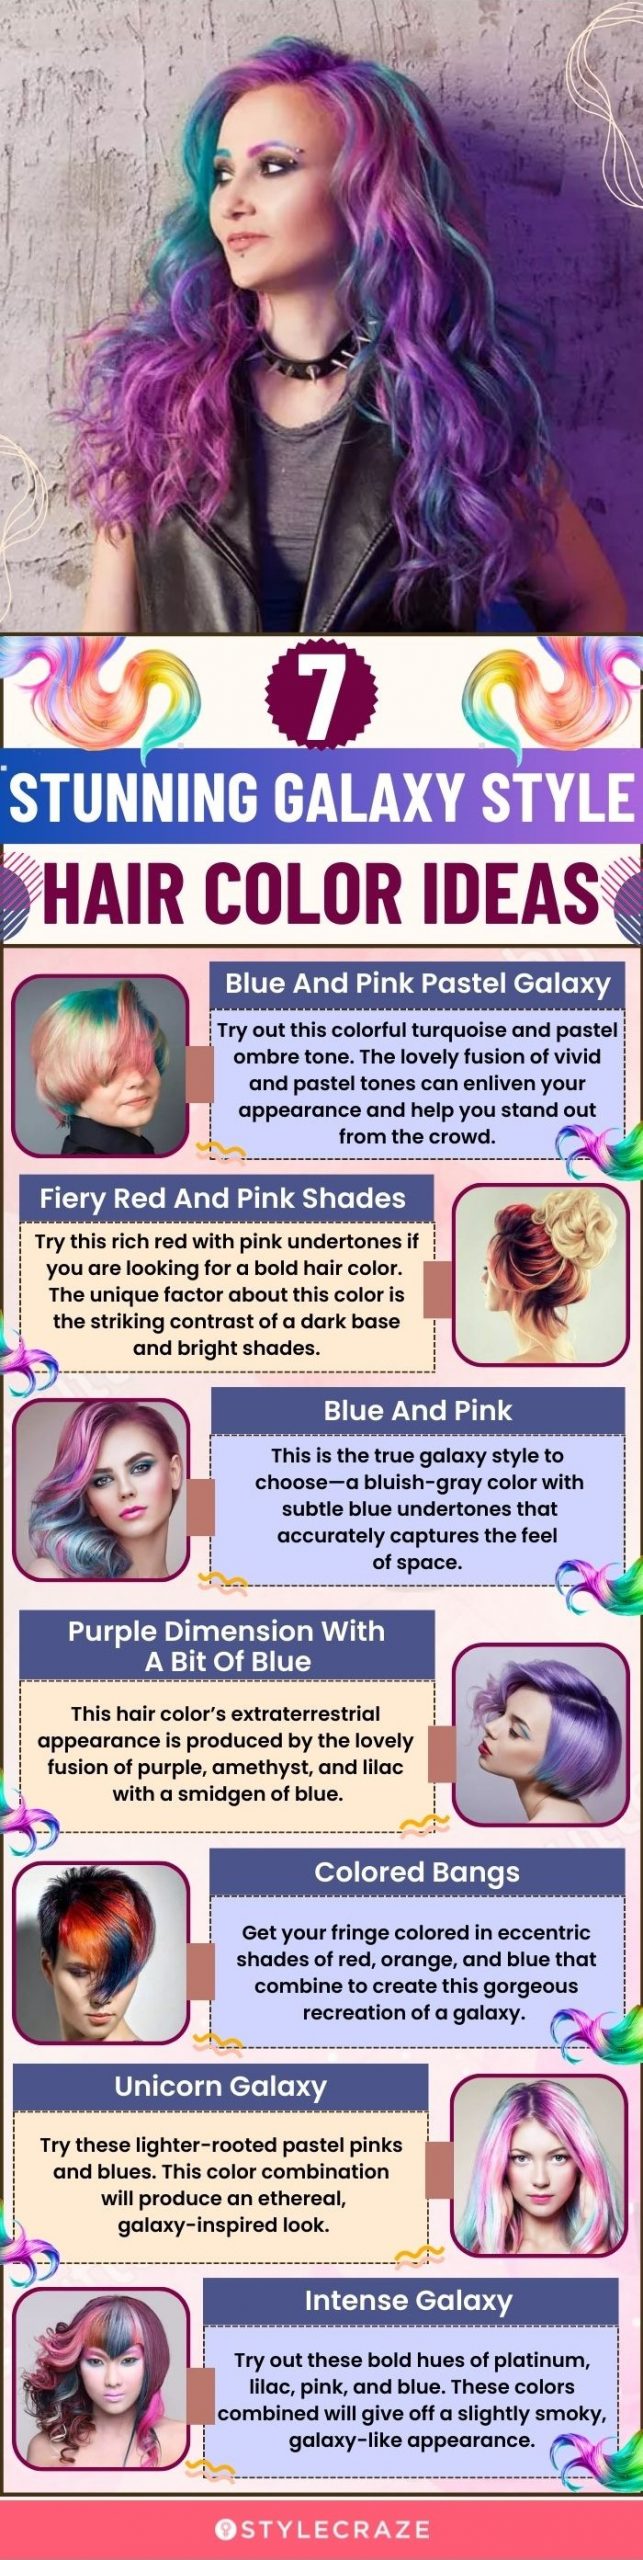 7 stunning galaxy style hair color ideass (infographic)